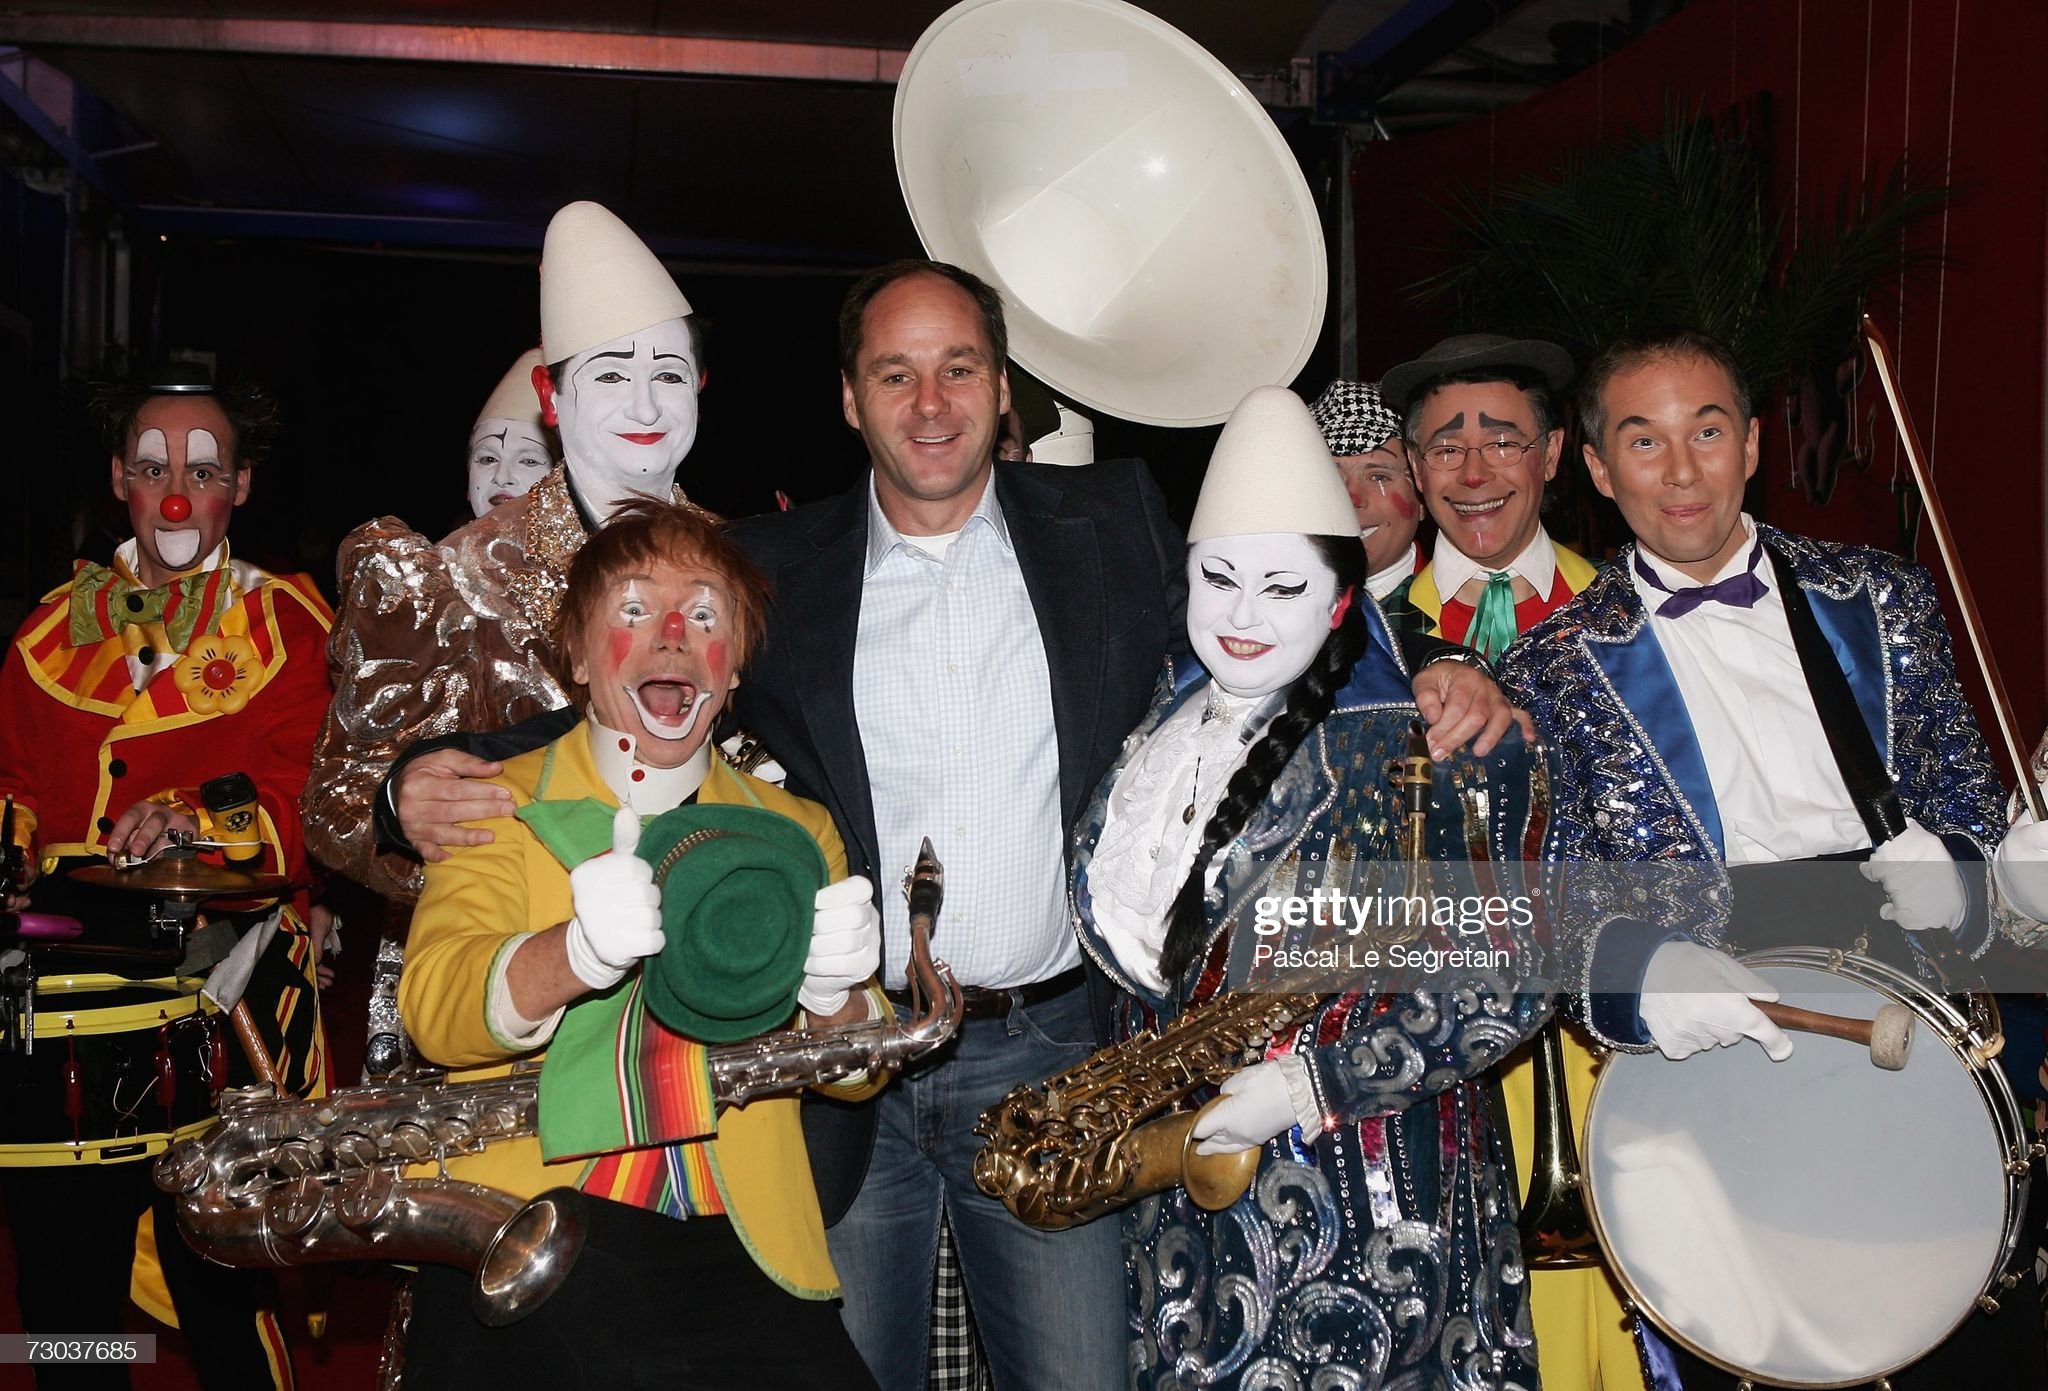 Former F1 driver Gerhard Berger poses as he arrives to attend the 31th International Circus Festival of Monte-Carlo on January 18, 2007 in Monaco. Photo by Pascal Le Segretain / Getty Images.